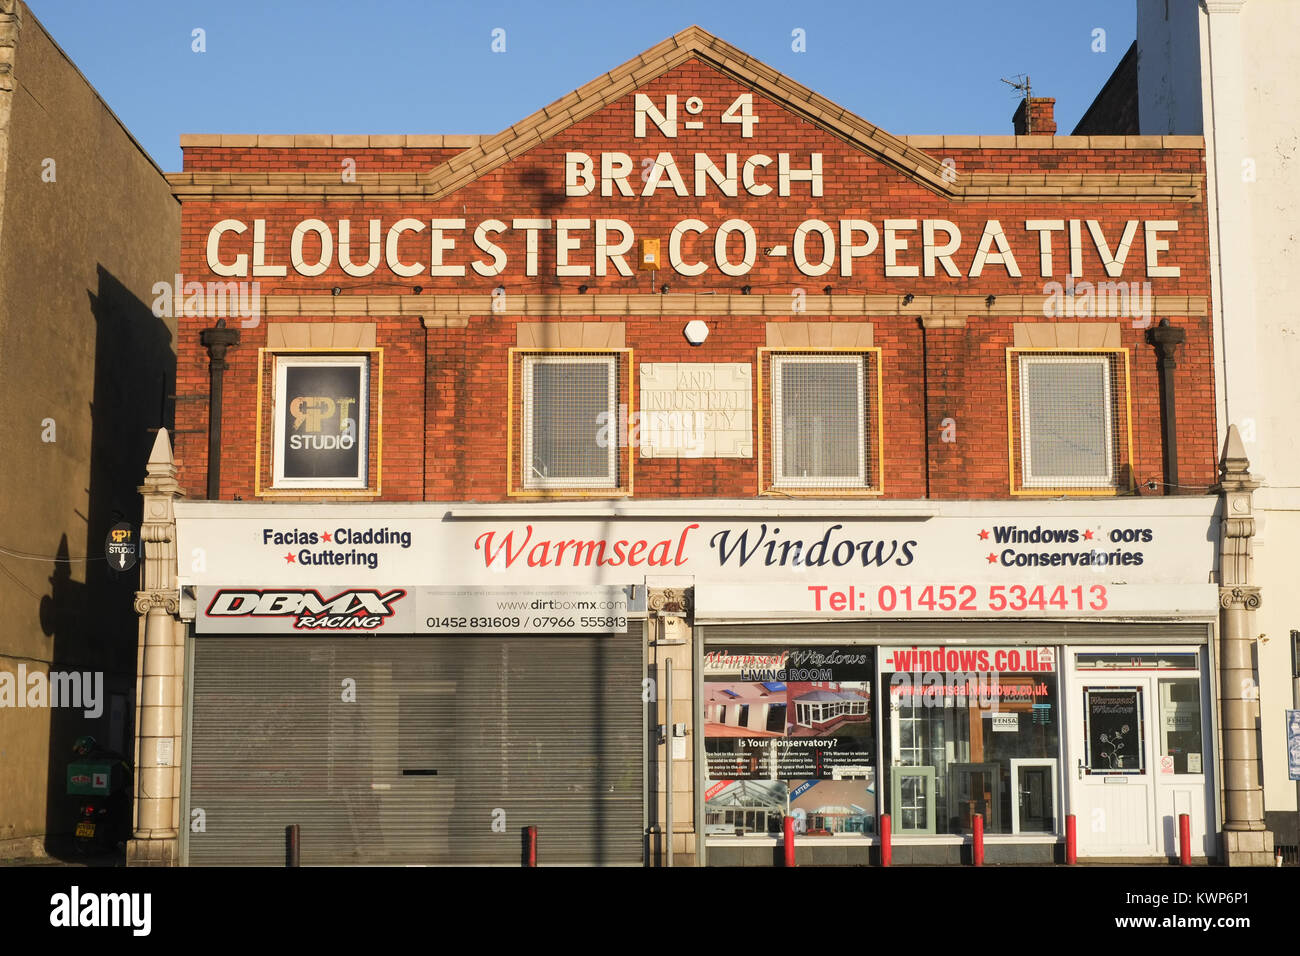 Gloucester Cooperative and Industrial Society premises Stock Photo